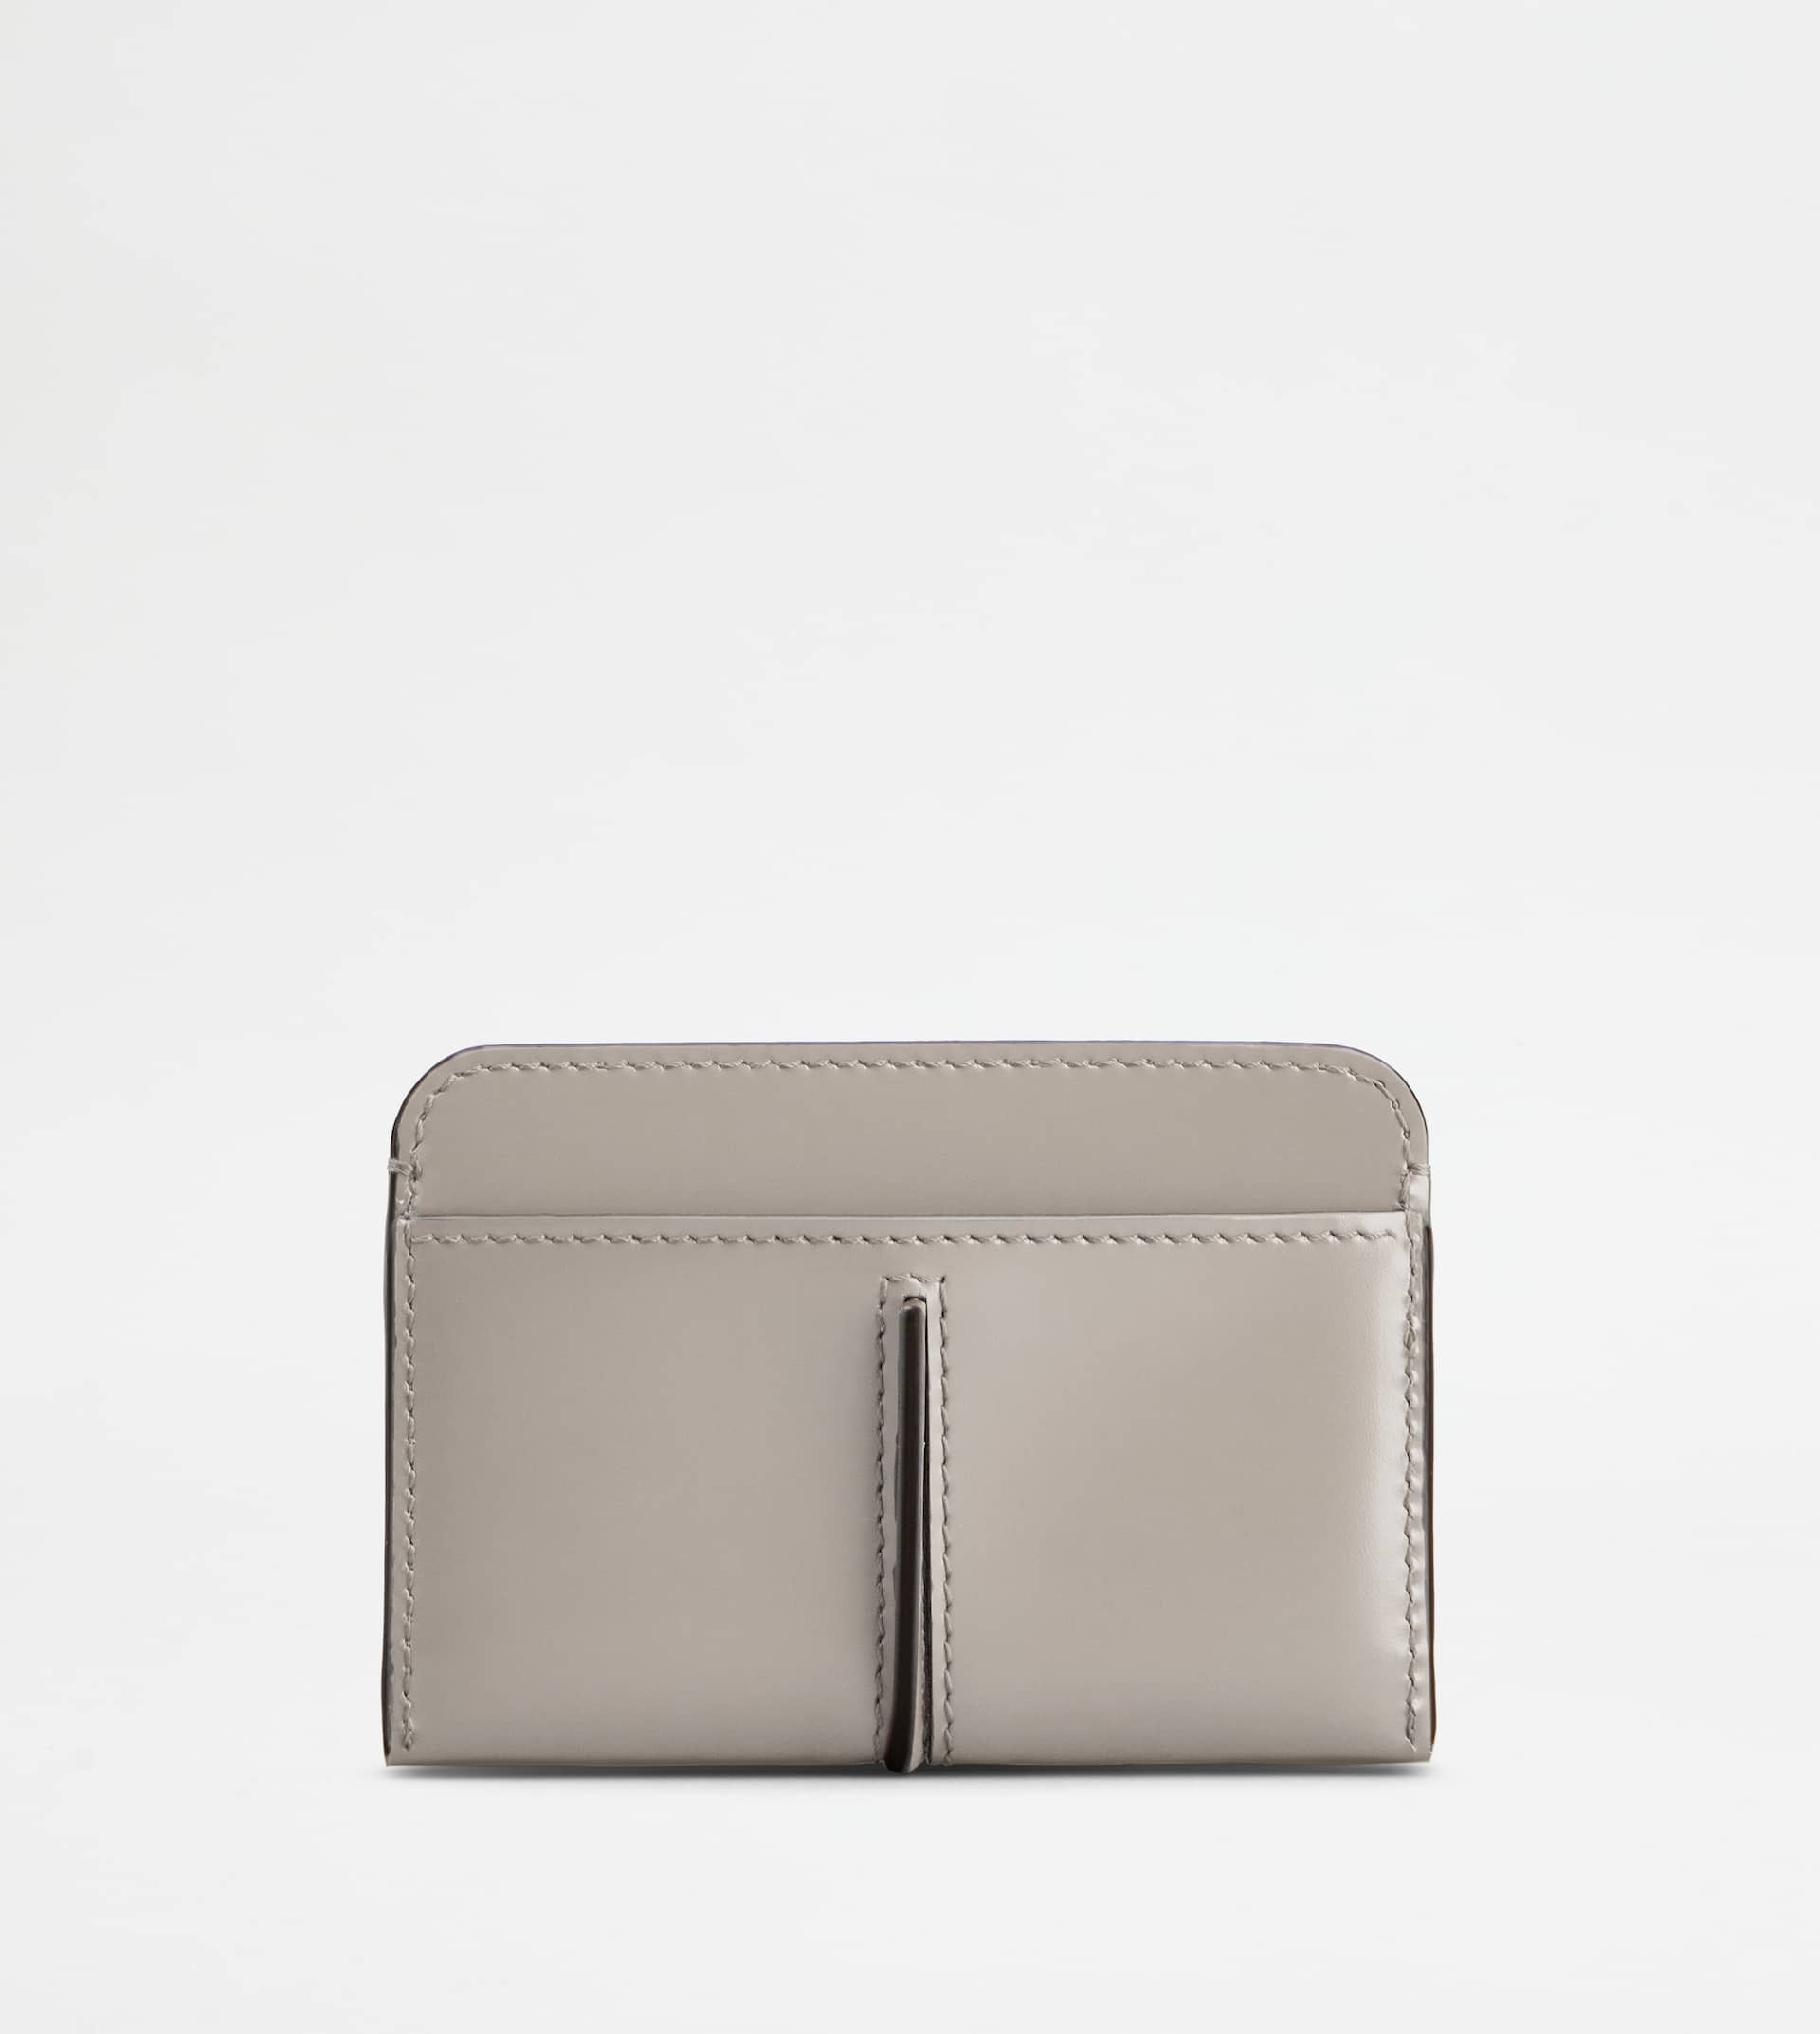 T TIMELESS CREDIT CARD HOLDER IN LEATHER - GREY - 2